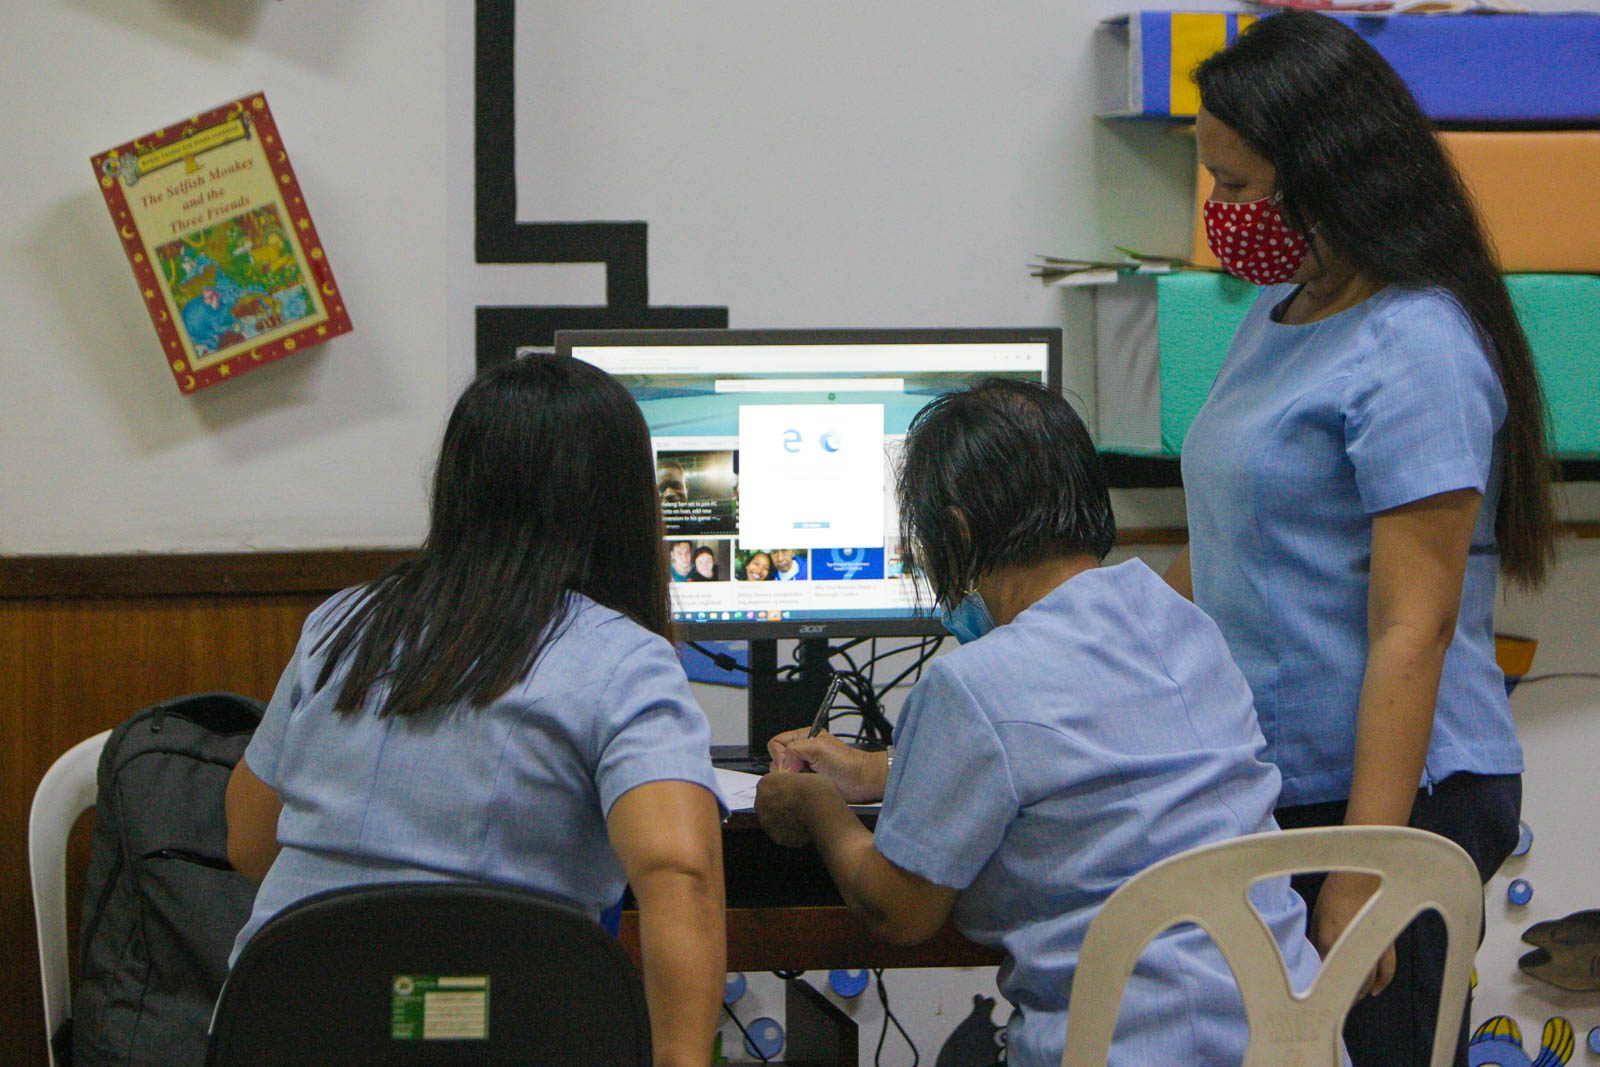 To boost students’ competence, PH needs better teacher training ...